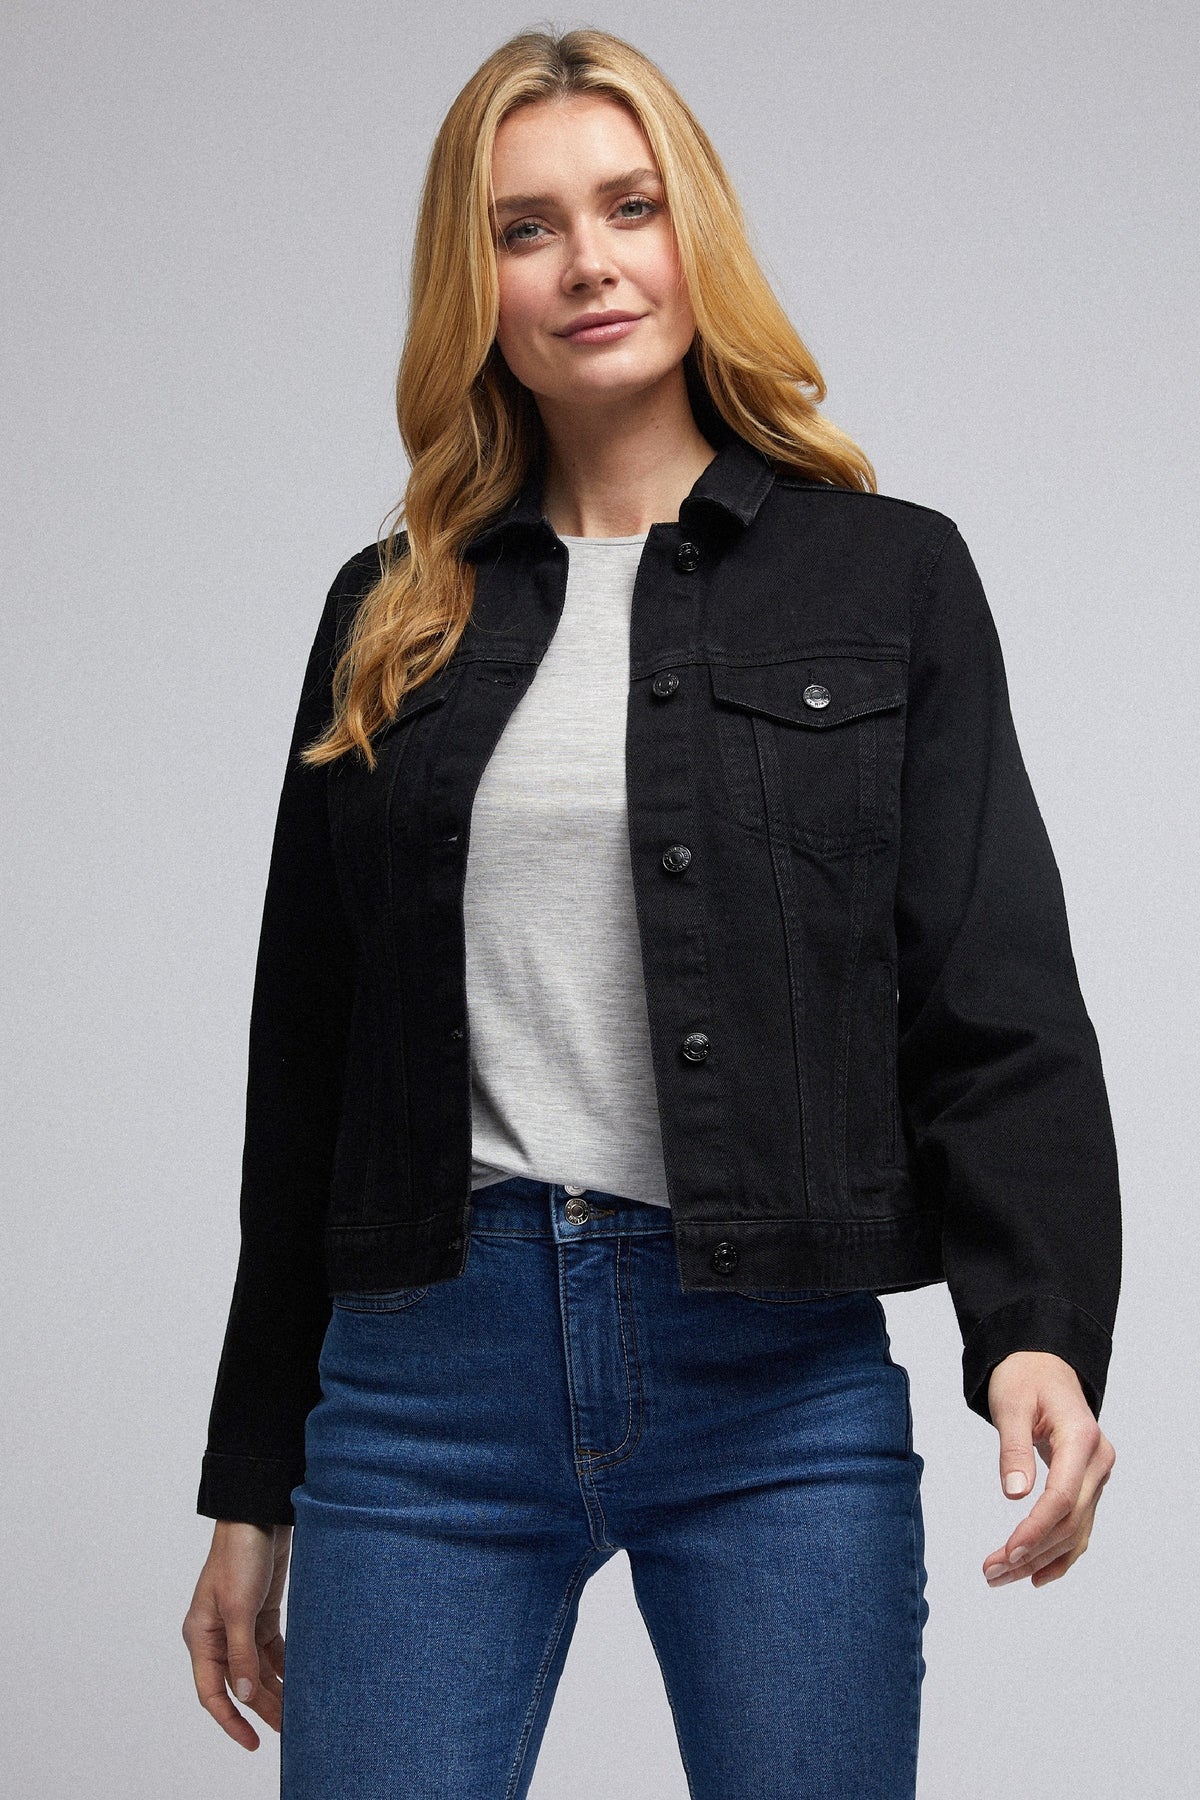 Stylish black denim jacket for women, featured on a model with wavy blonde hair, paired with a gray top and blue jeans.